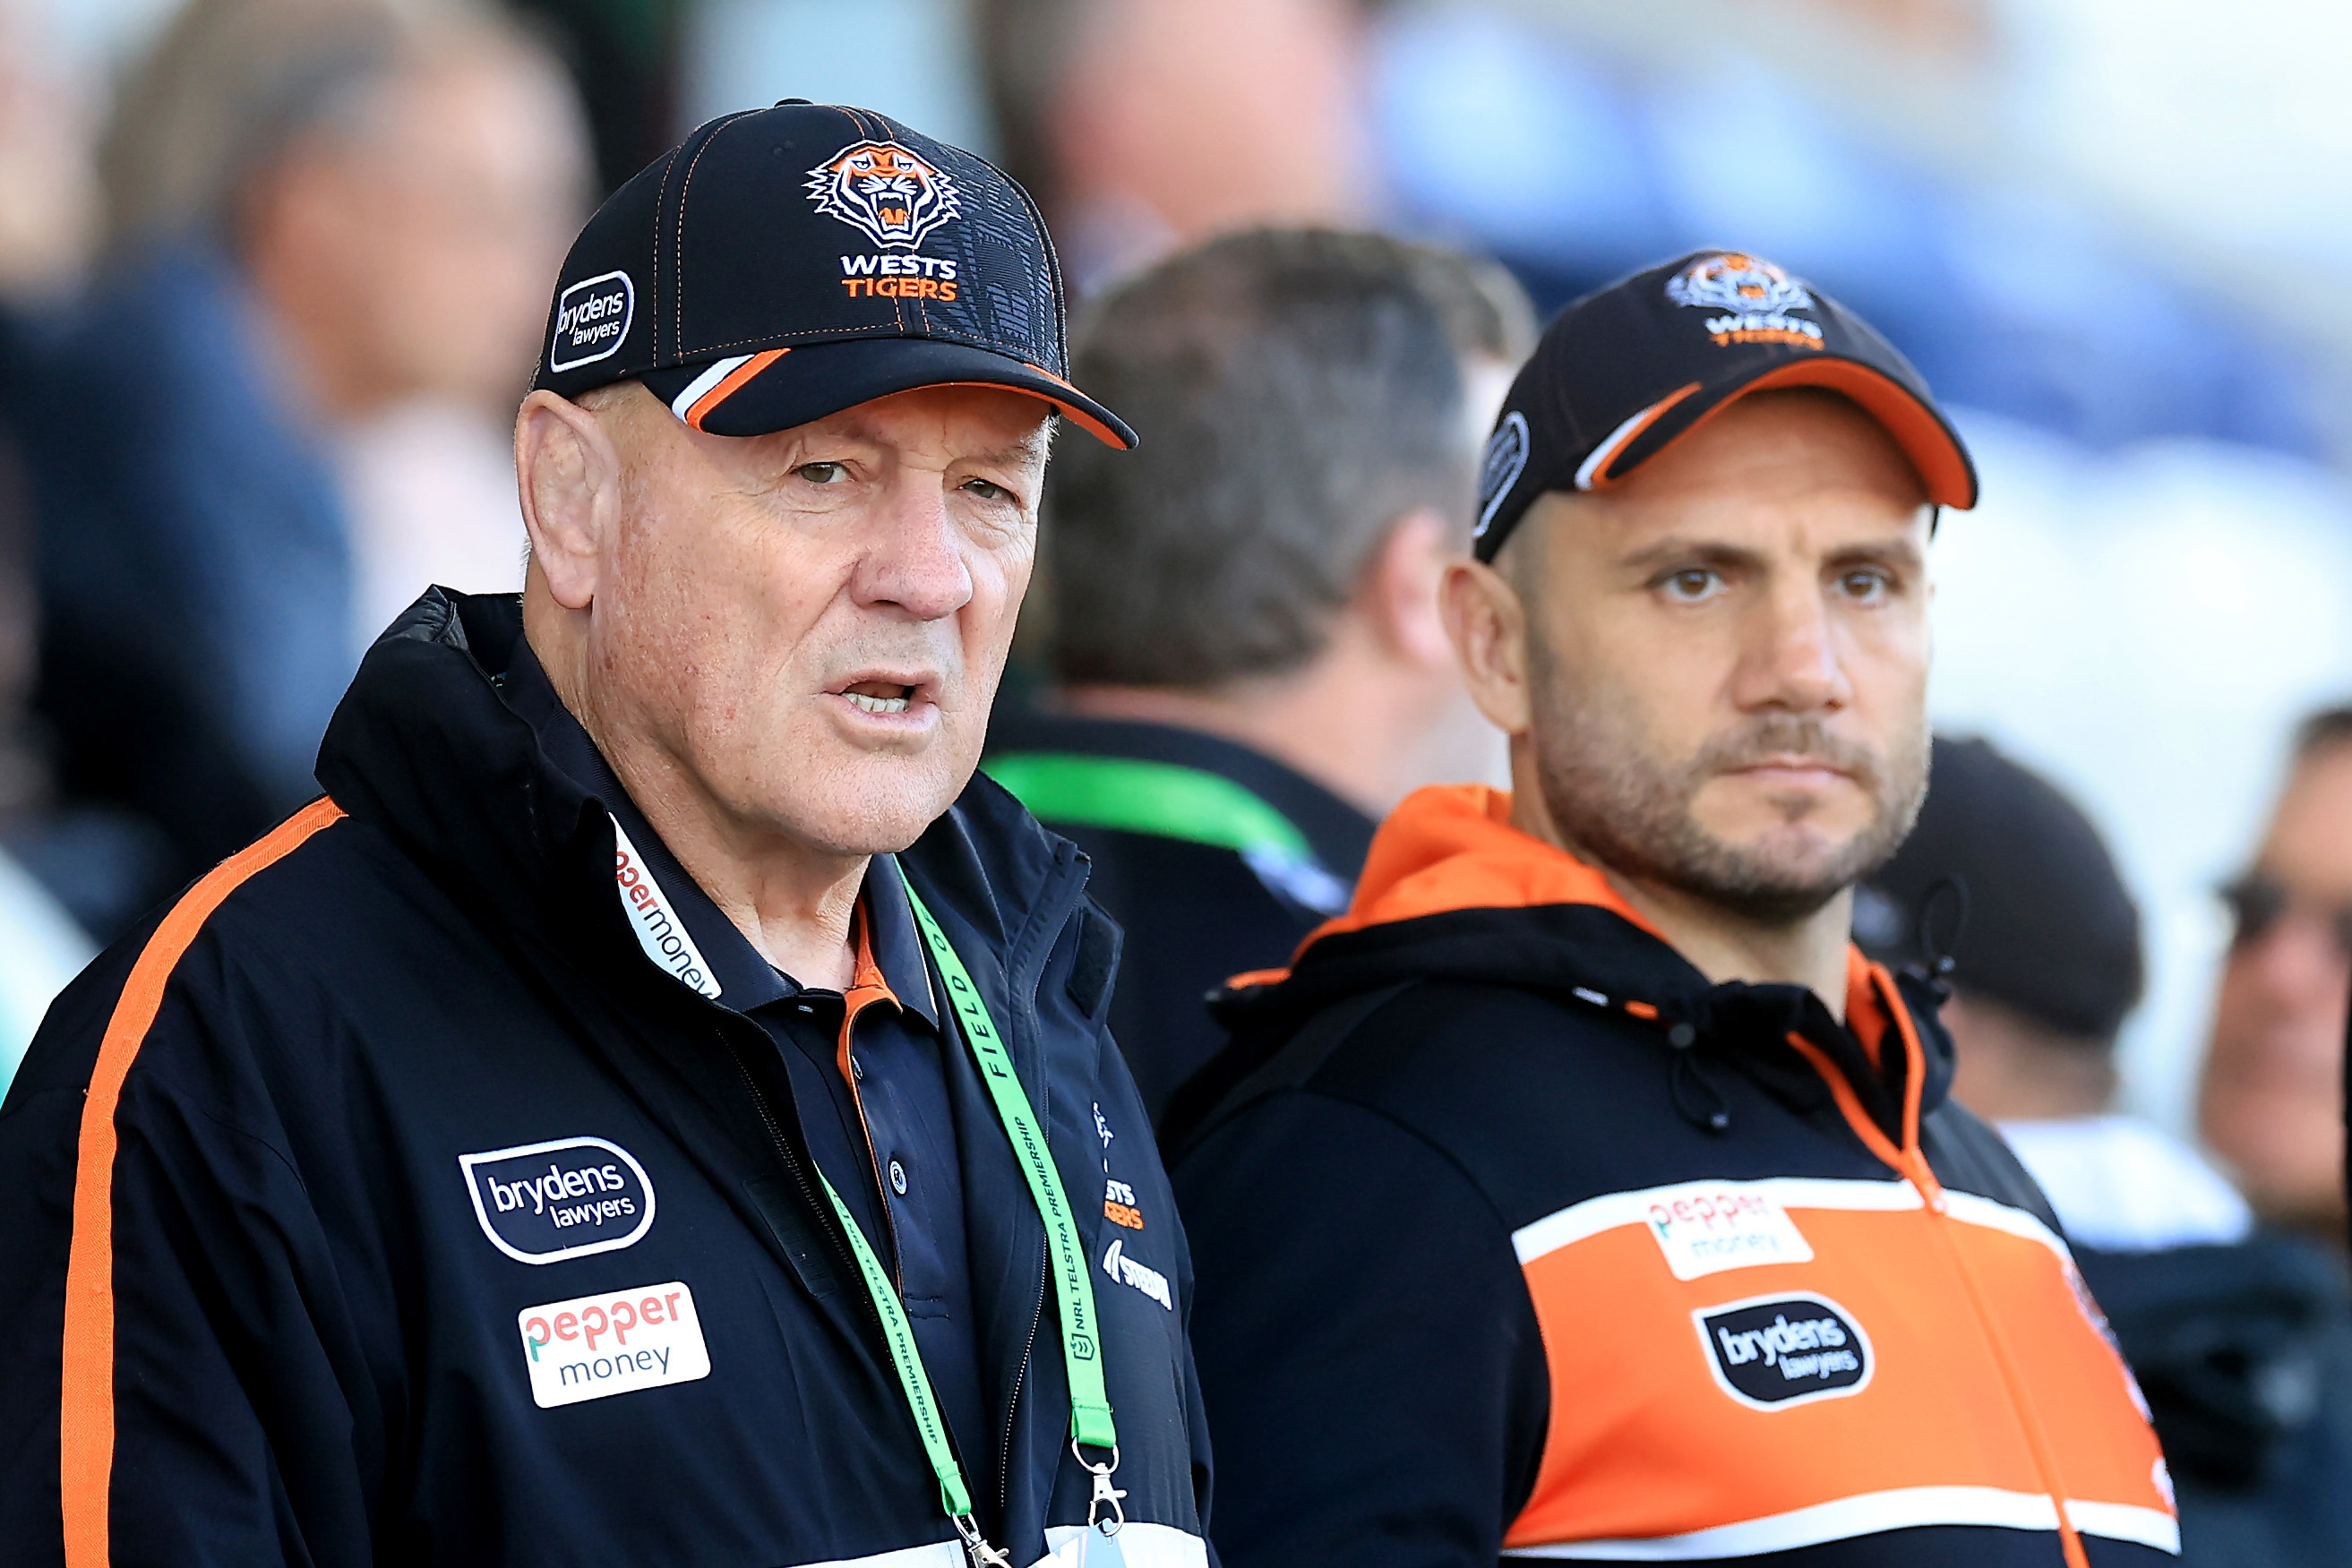 Pepper Money partners with Wests Tigers